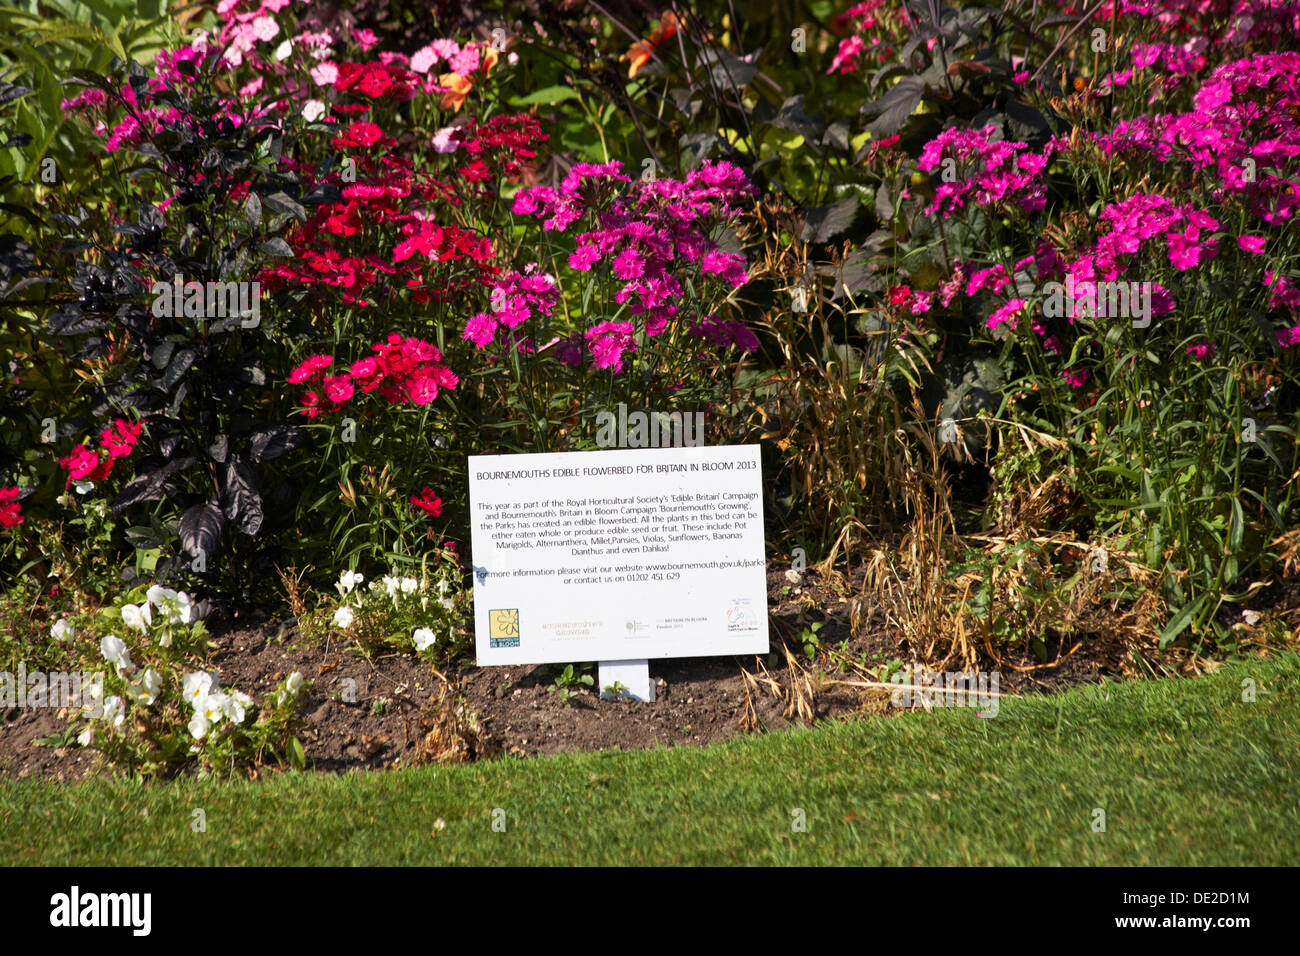 Bournemouth's edible flowerbed for Britain in Bloom 2013 at Bournemouth Gardens in September Stock Photo